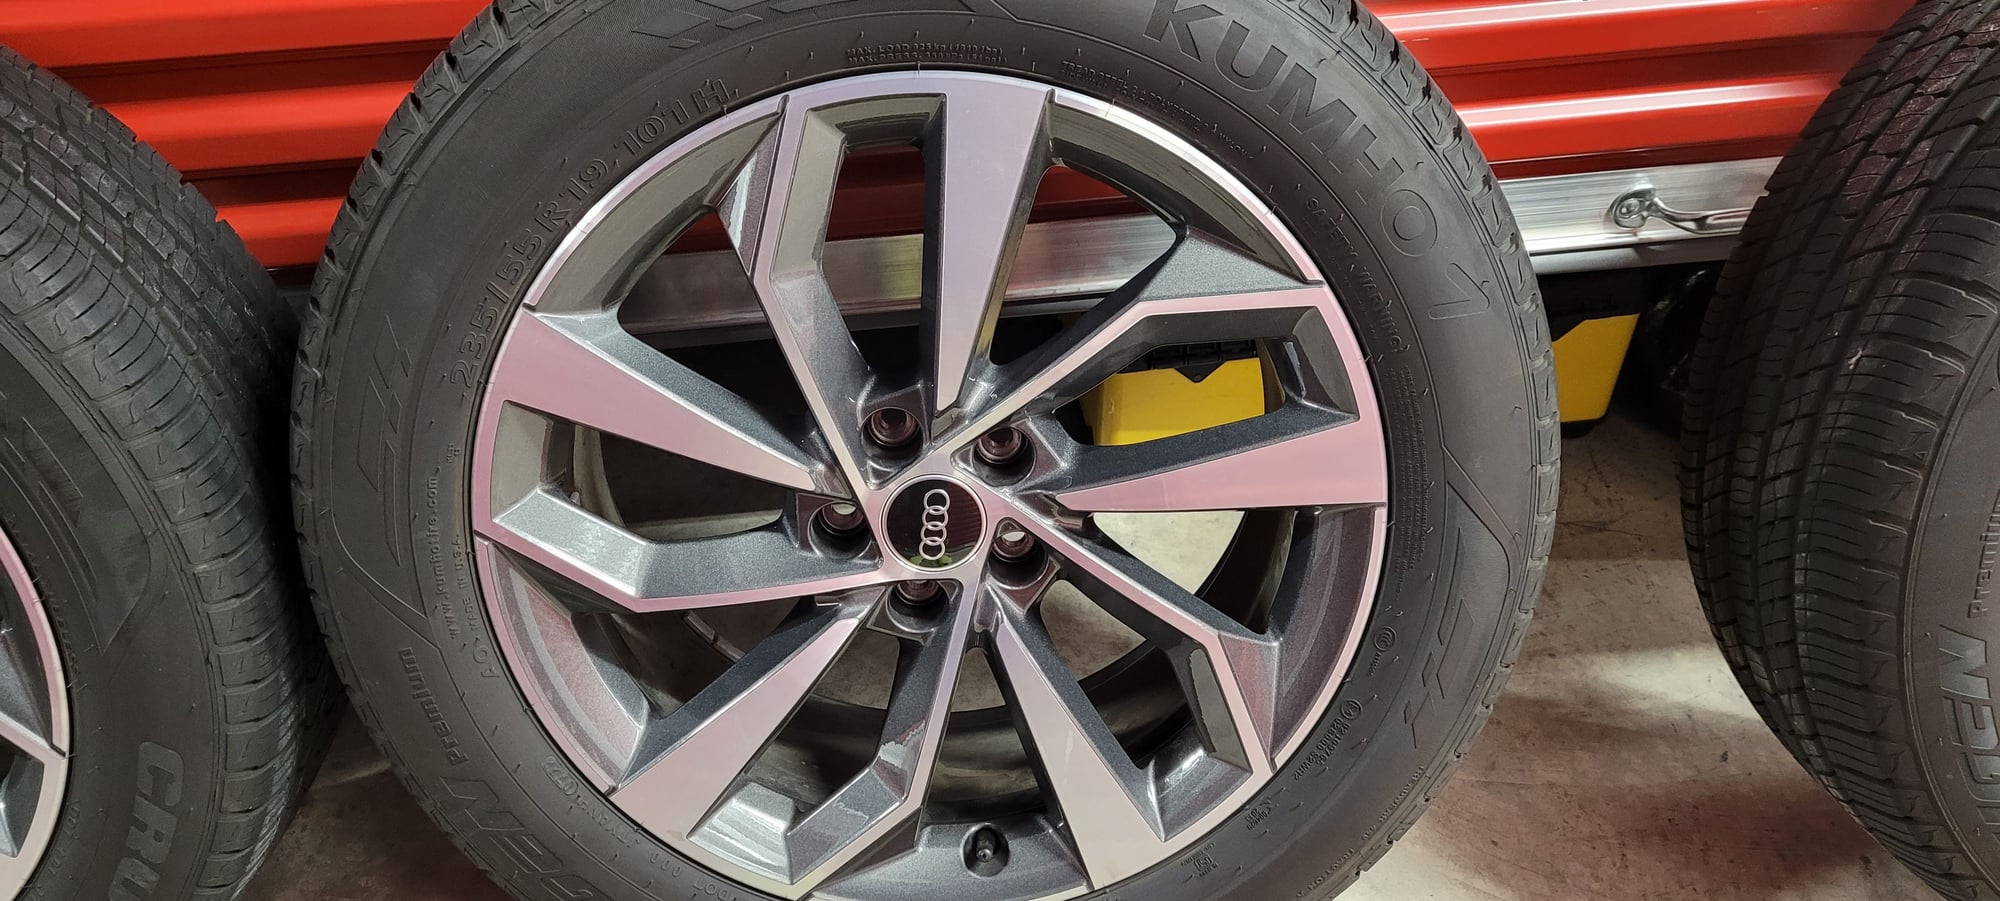 Wheels and Tires/Axles - OEM Q5 19 inch wheels/tires - Fort Worth - Like New - Used - 2022 Audi Q5 - Fort Worth, TX 76131, United States